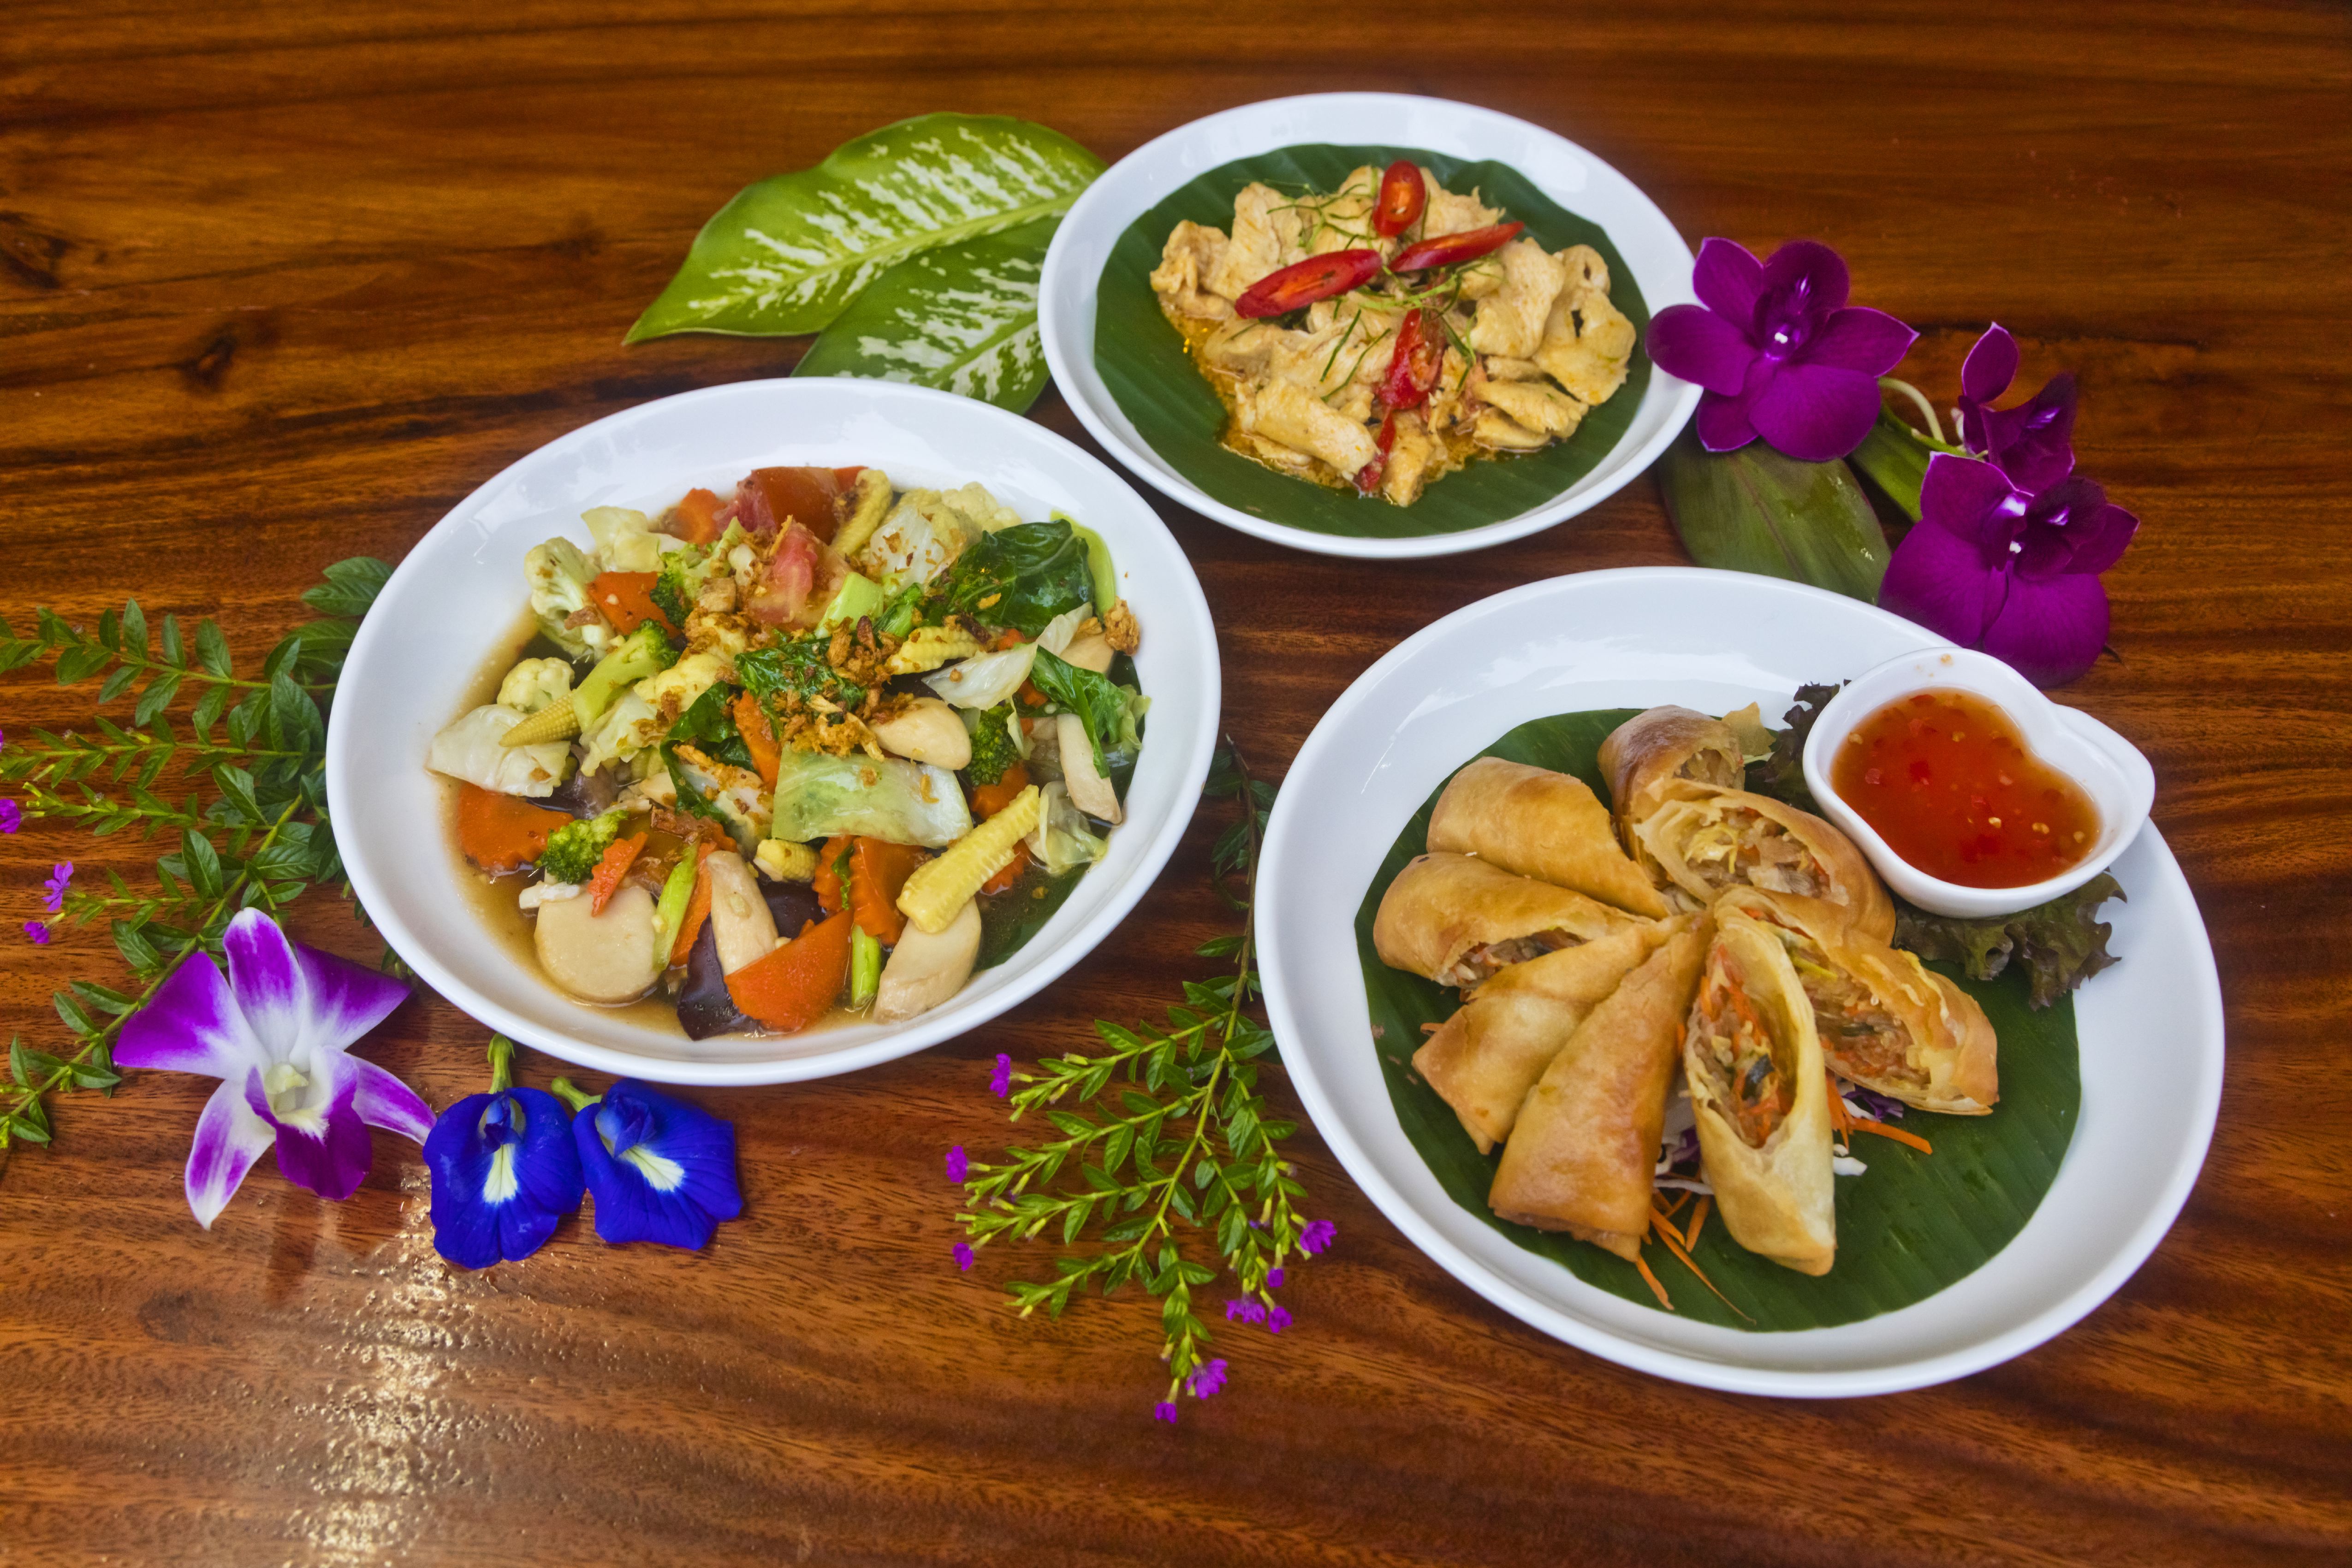 Spring Rolls, Mixed Vegetables and Chicken Curry are delicious at Cocos Cafe, KHAO SOK, THAILAND